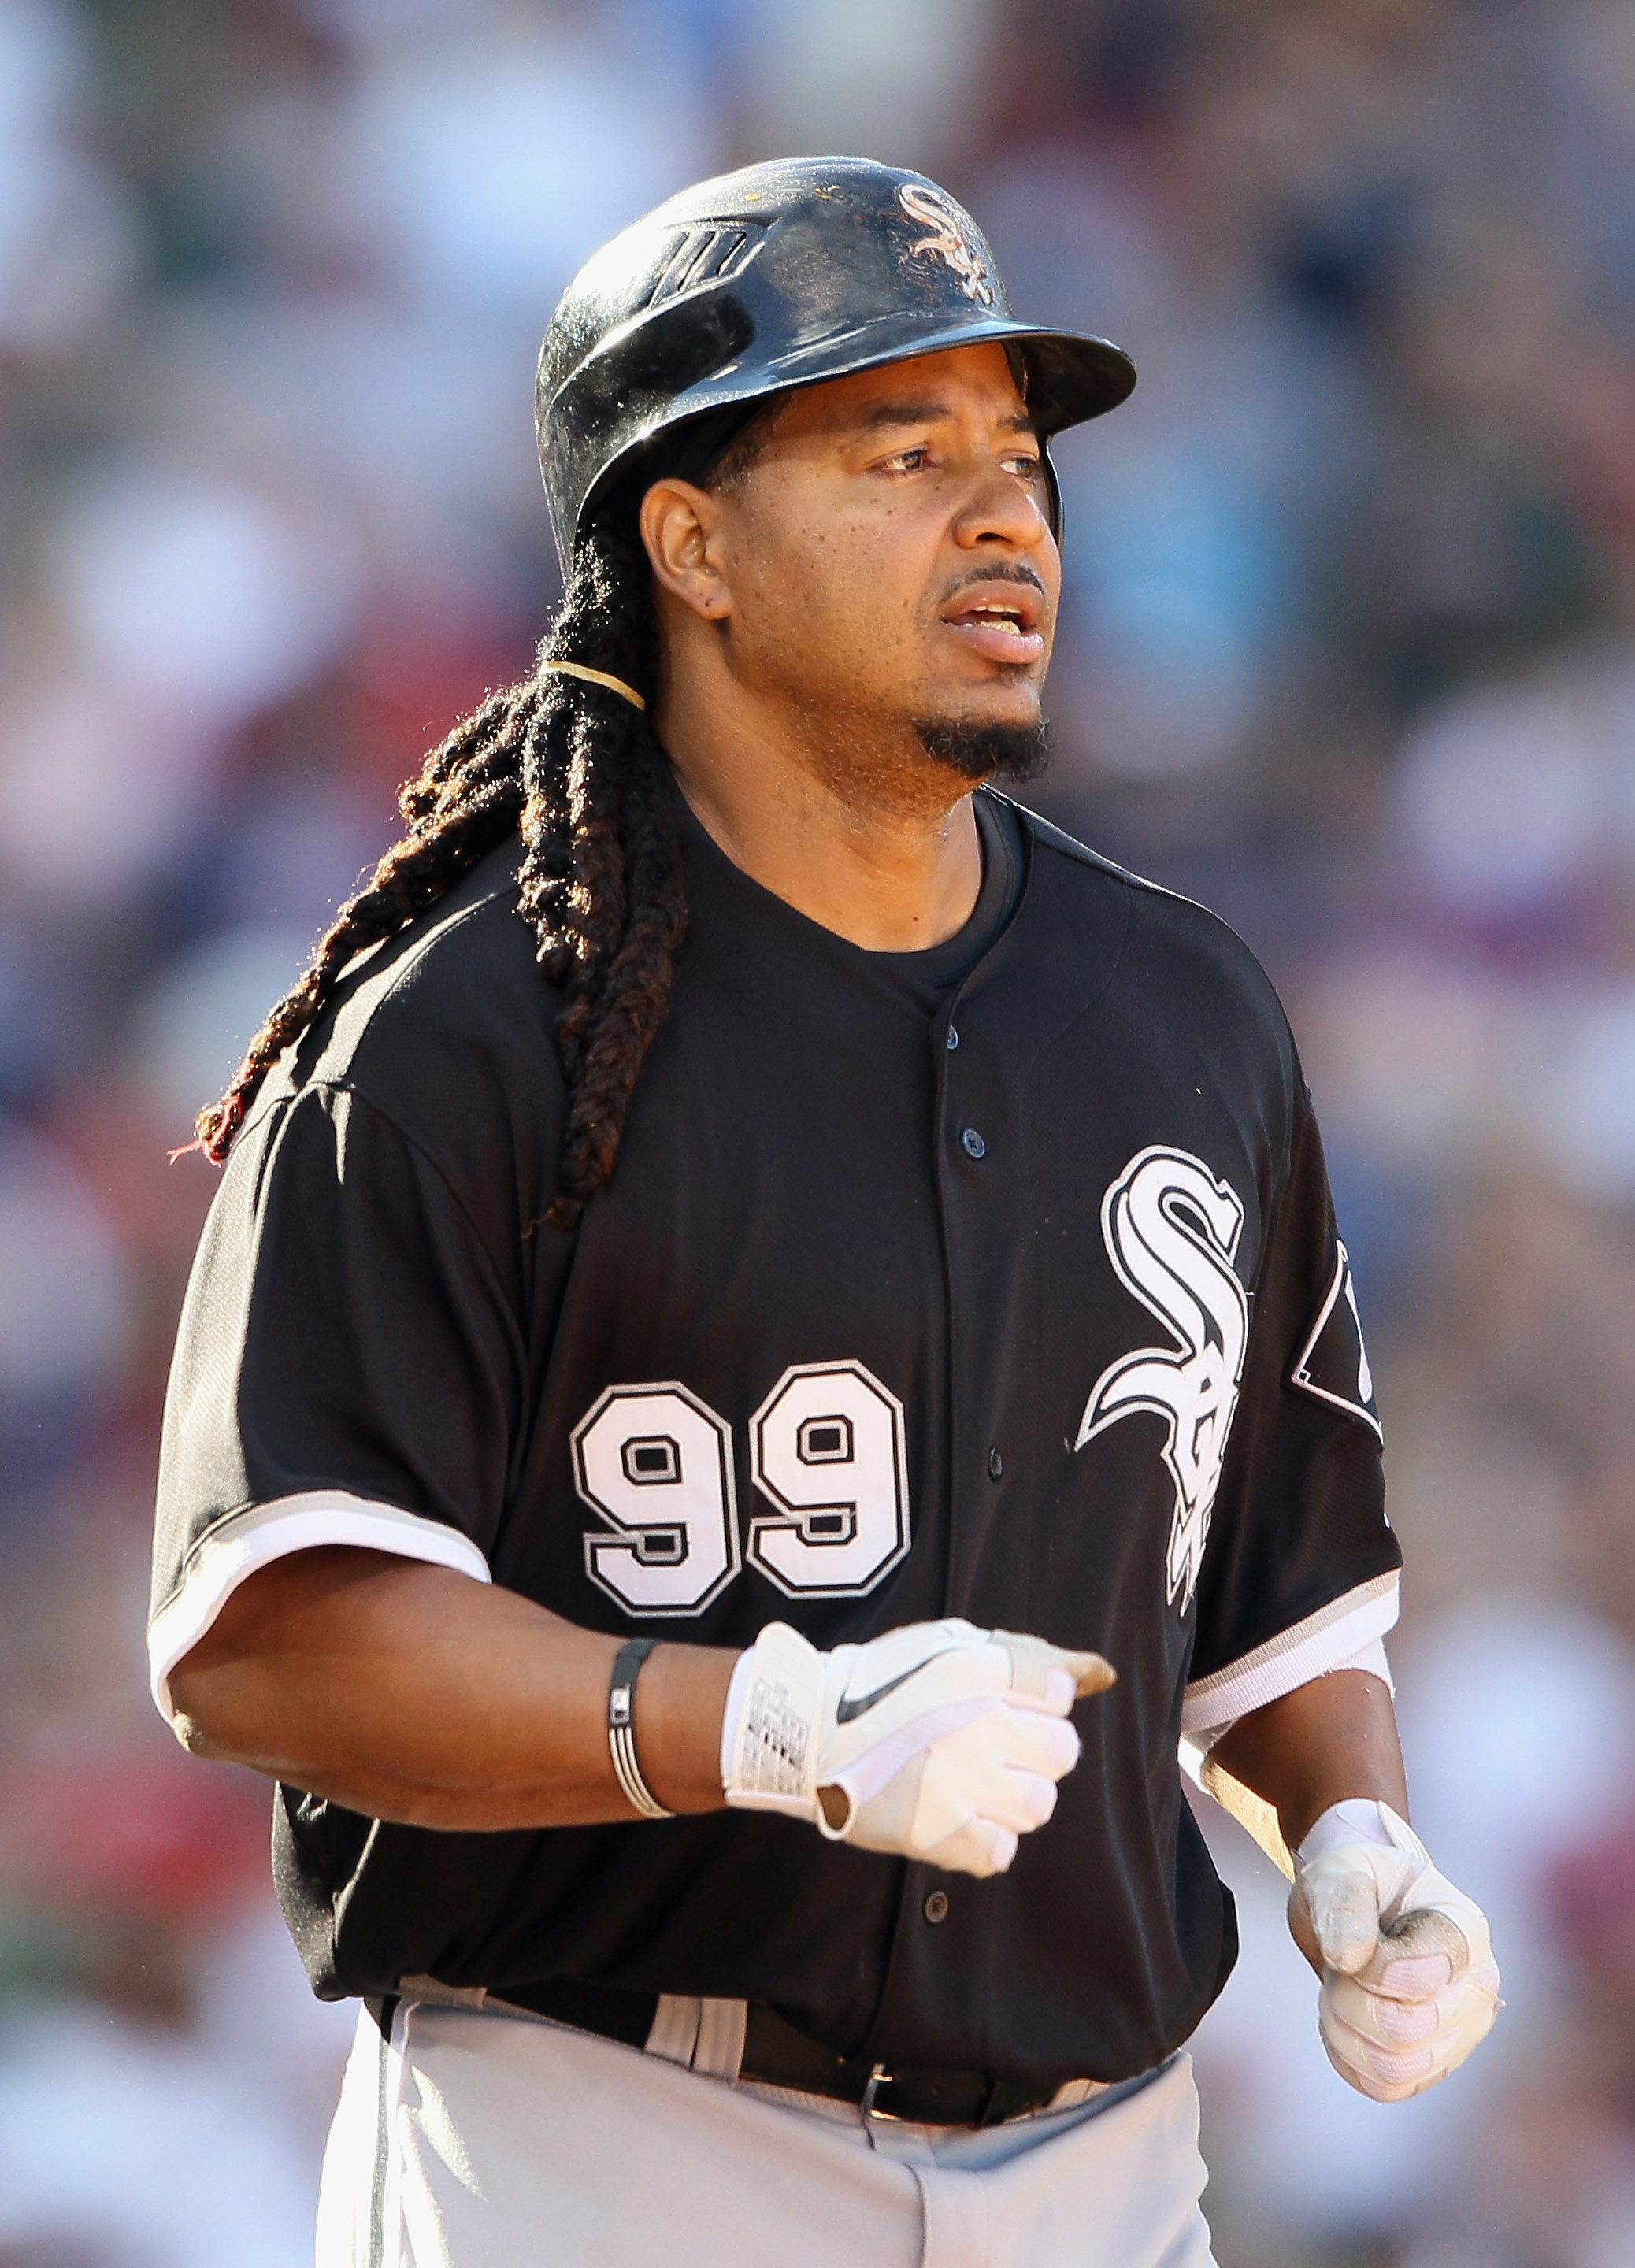 BOSTON - SEPTEMBER 05:  Manny Ramirez #99 of the Chicago White Sox heads to first base after he was hit by a pitch in the eighth inning against the Boston Red Sox on September 5, 2010 at Fenway Park in Boston, Massachusetts.  (Photo by Elsa/Getty Images)